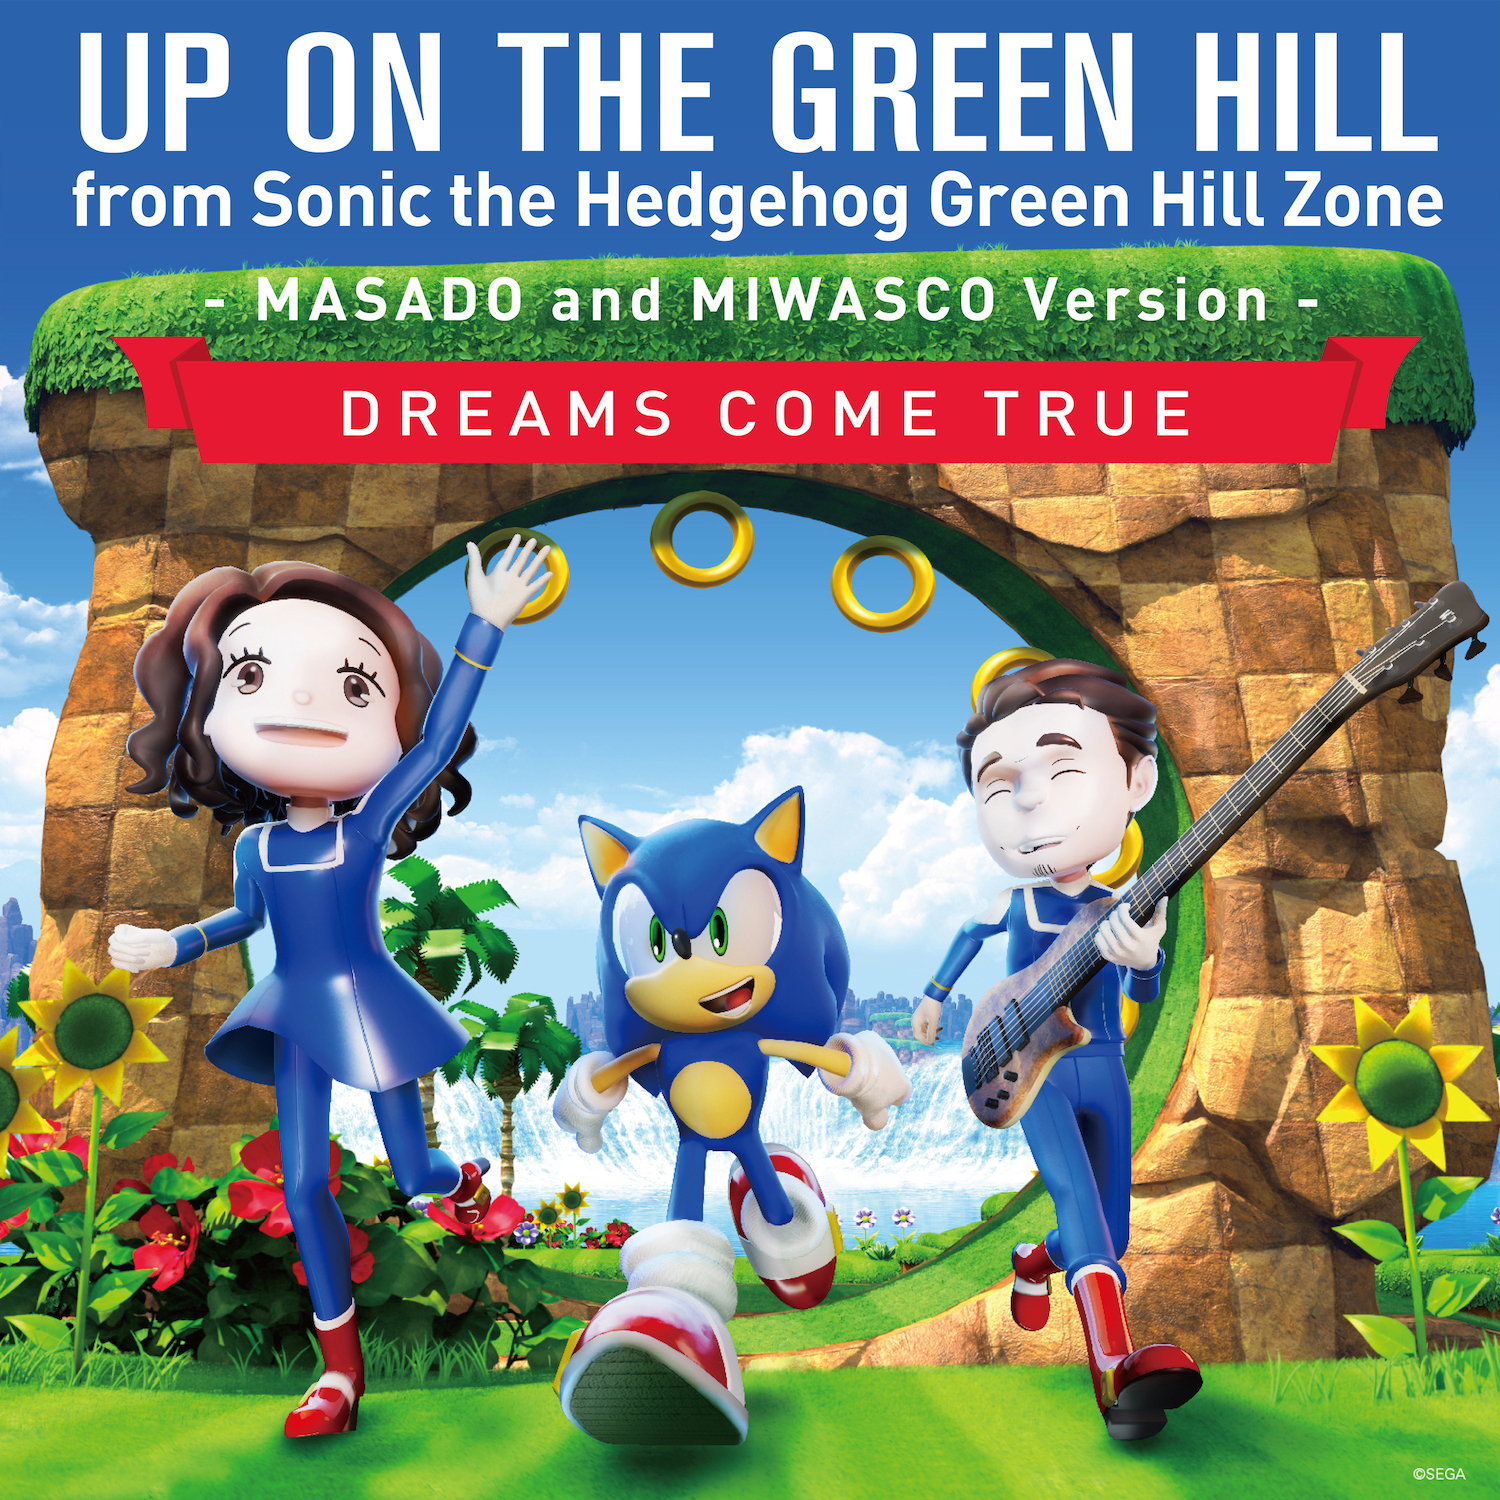 「UP ON THE GREEN HILL from Sonic the Hedgehog Green Hill Zone - MASADO and MIWASCO Version -」配信ジャケット